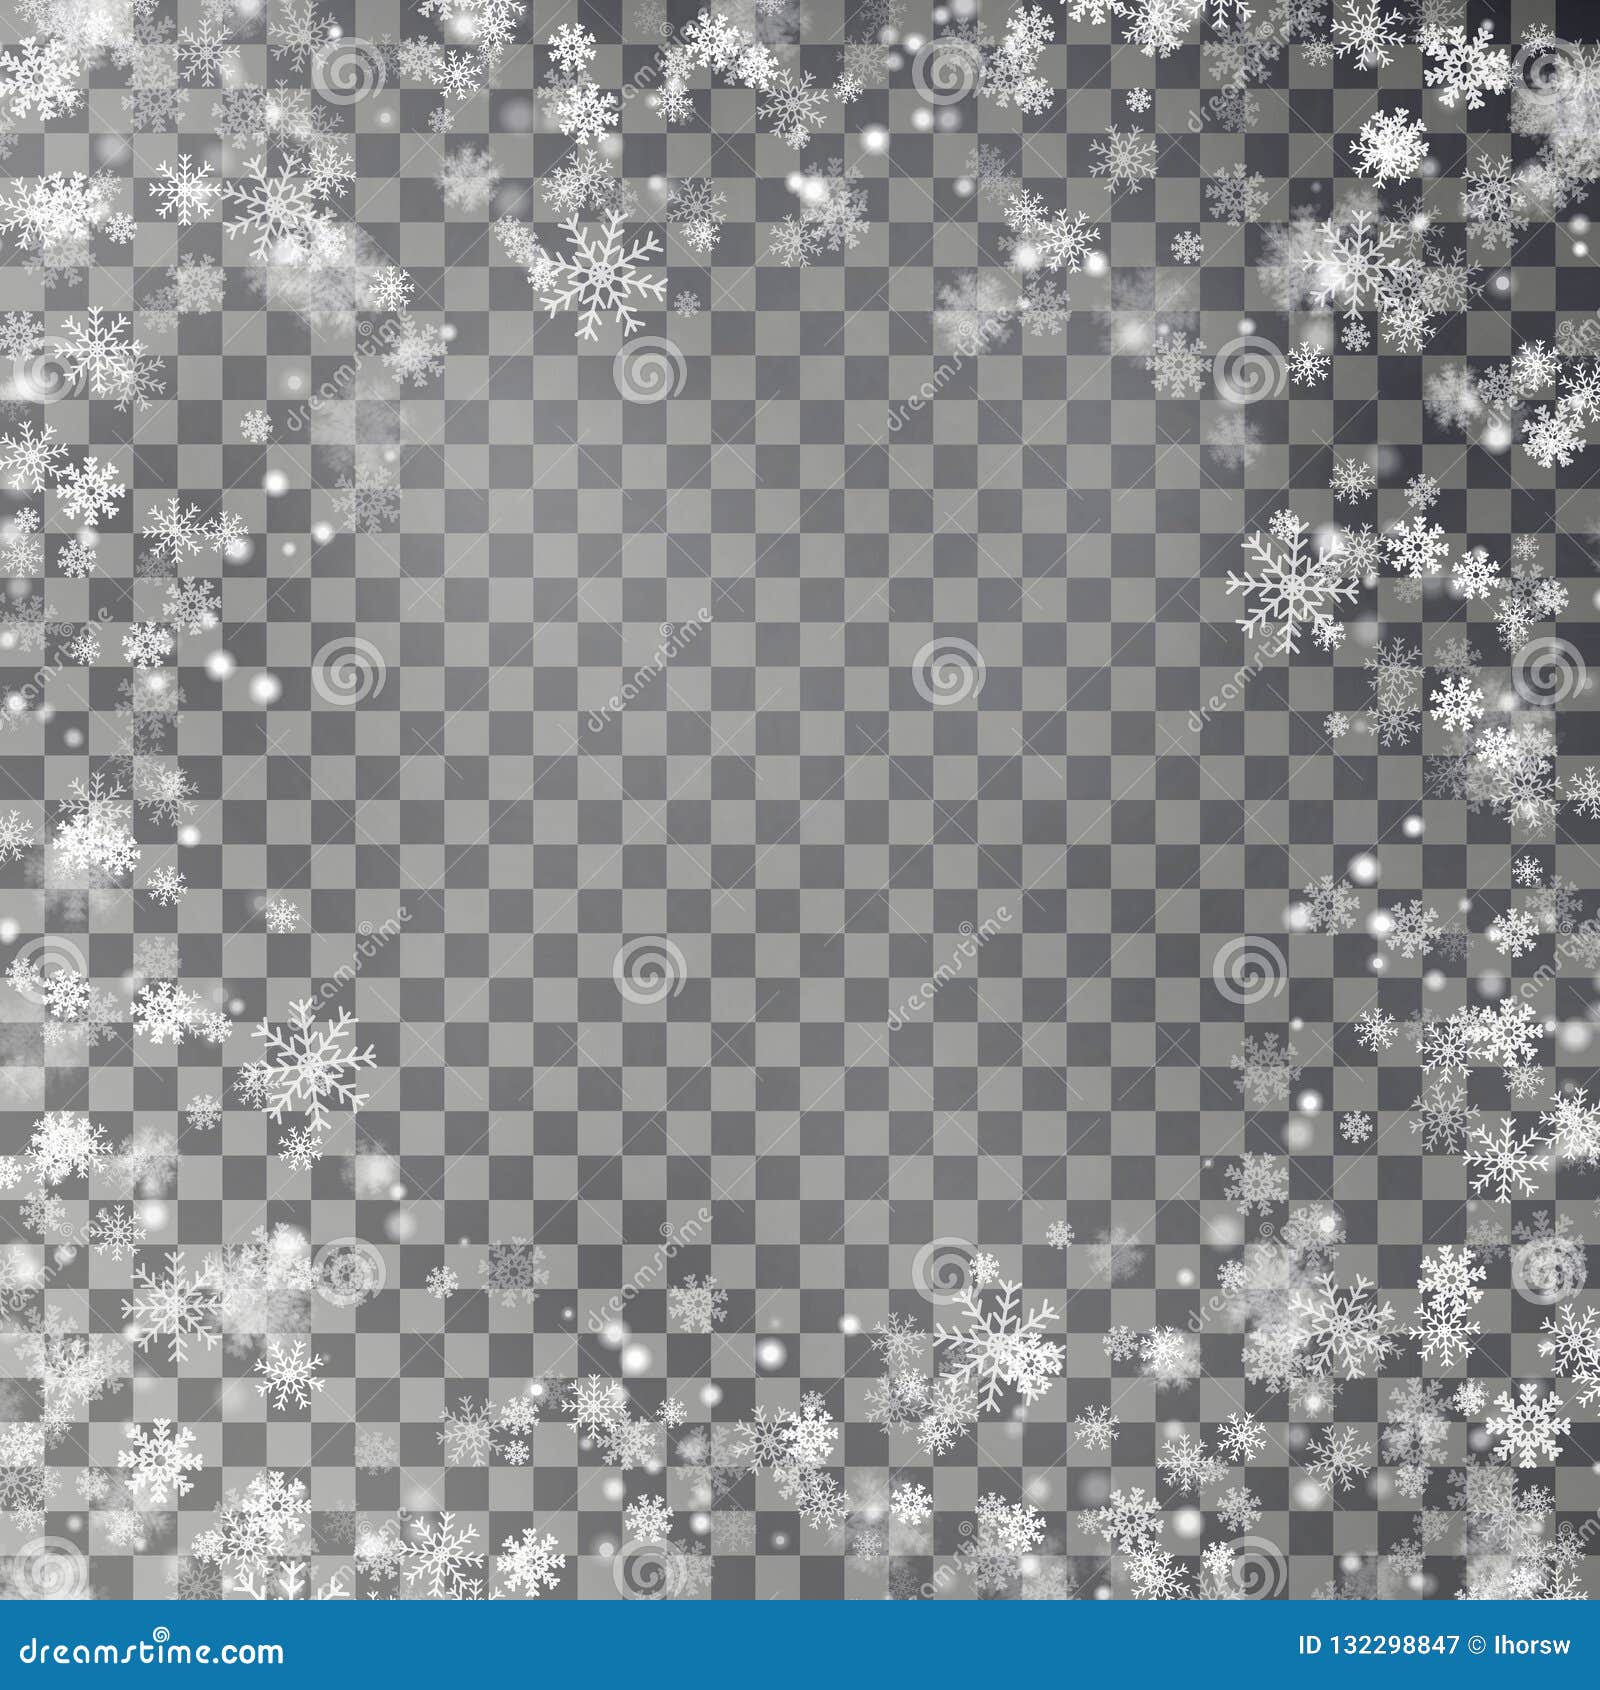 Download Snowflake Border Vector Isolated On Transparent Background ...